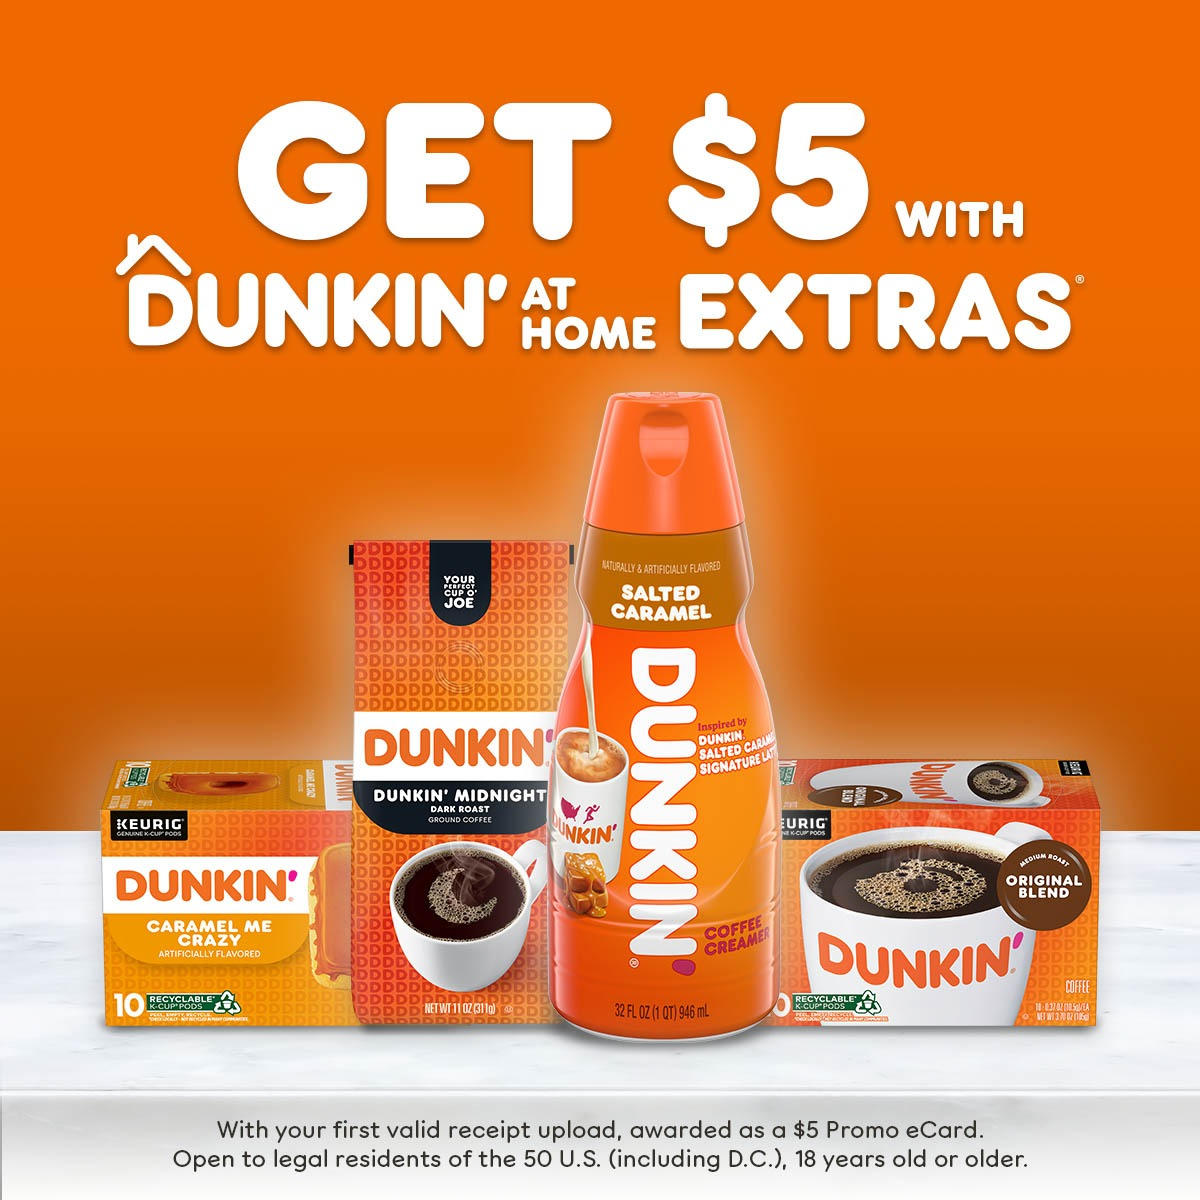 Receive a $5 Dunkin' Promo eCard when you upload your first Dunkin’ grocery receipt. Sign up for Dunkin’ At Home Extras to get started.